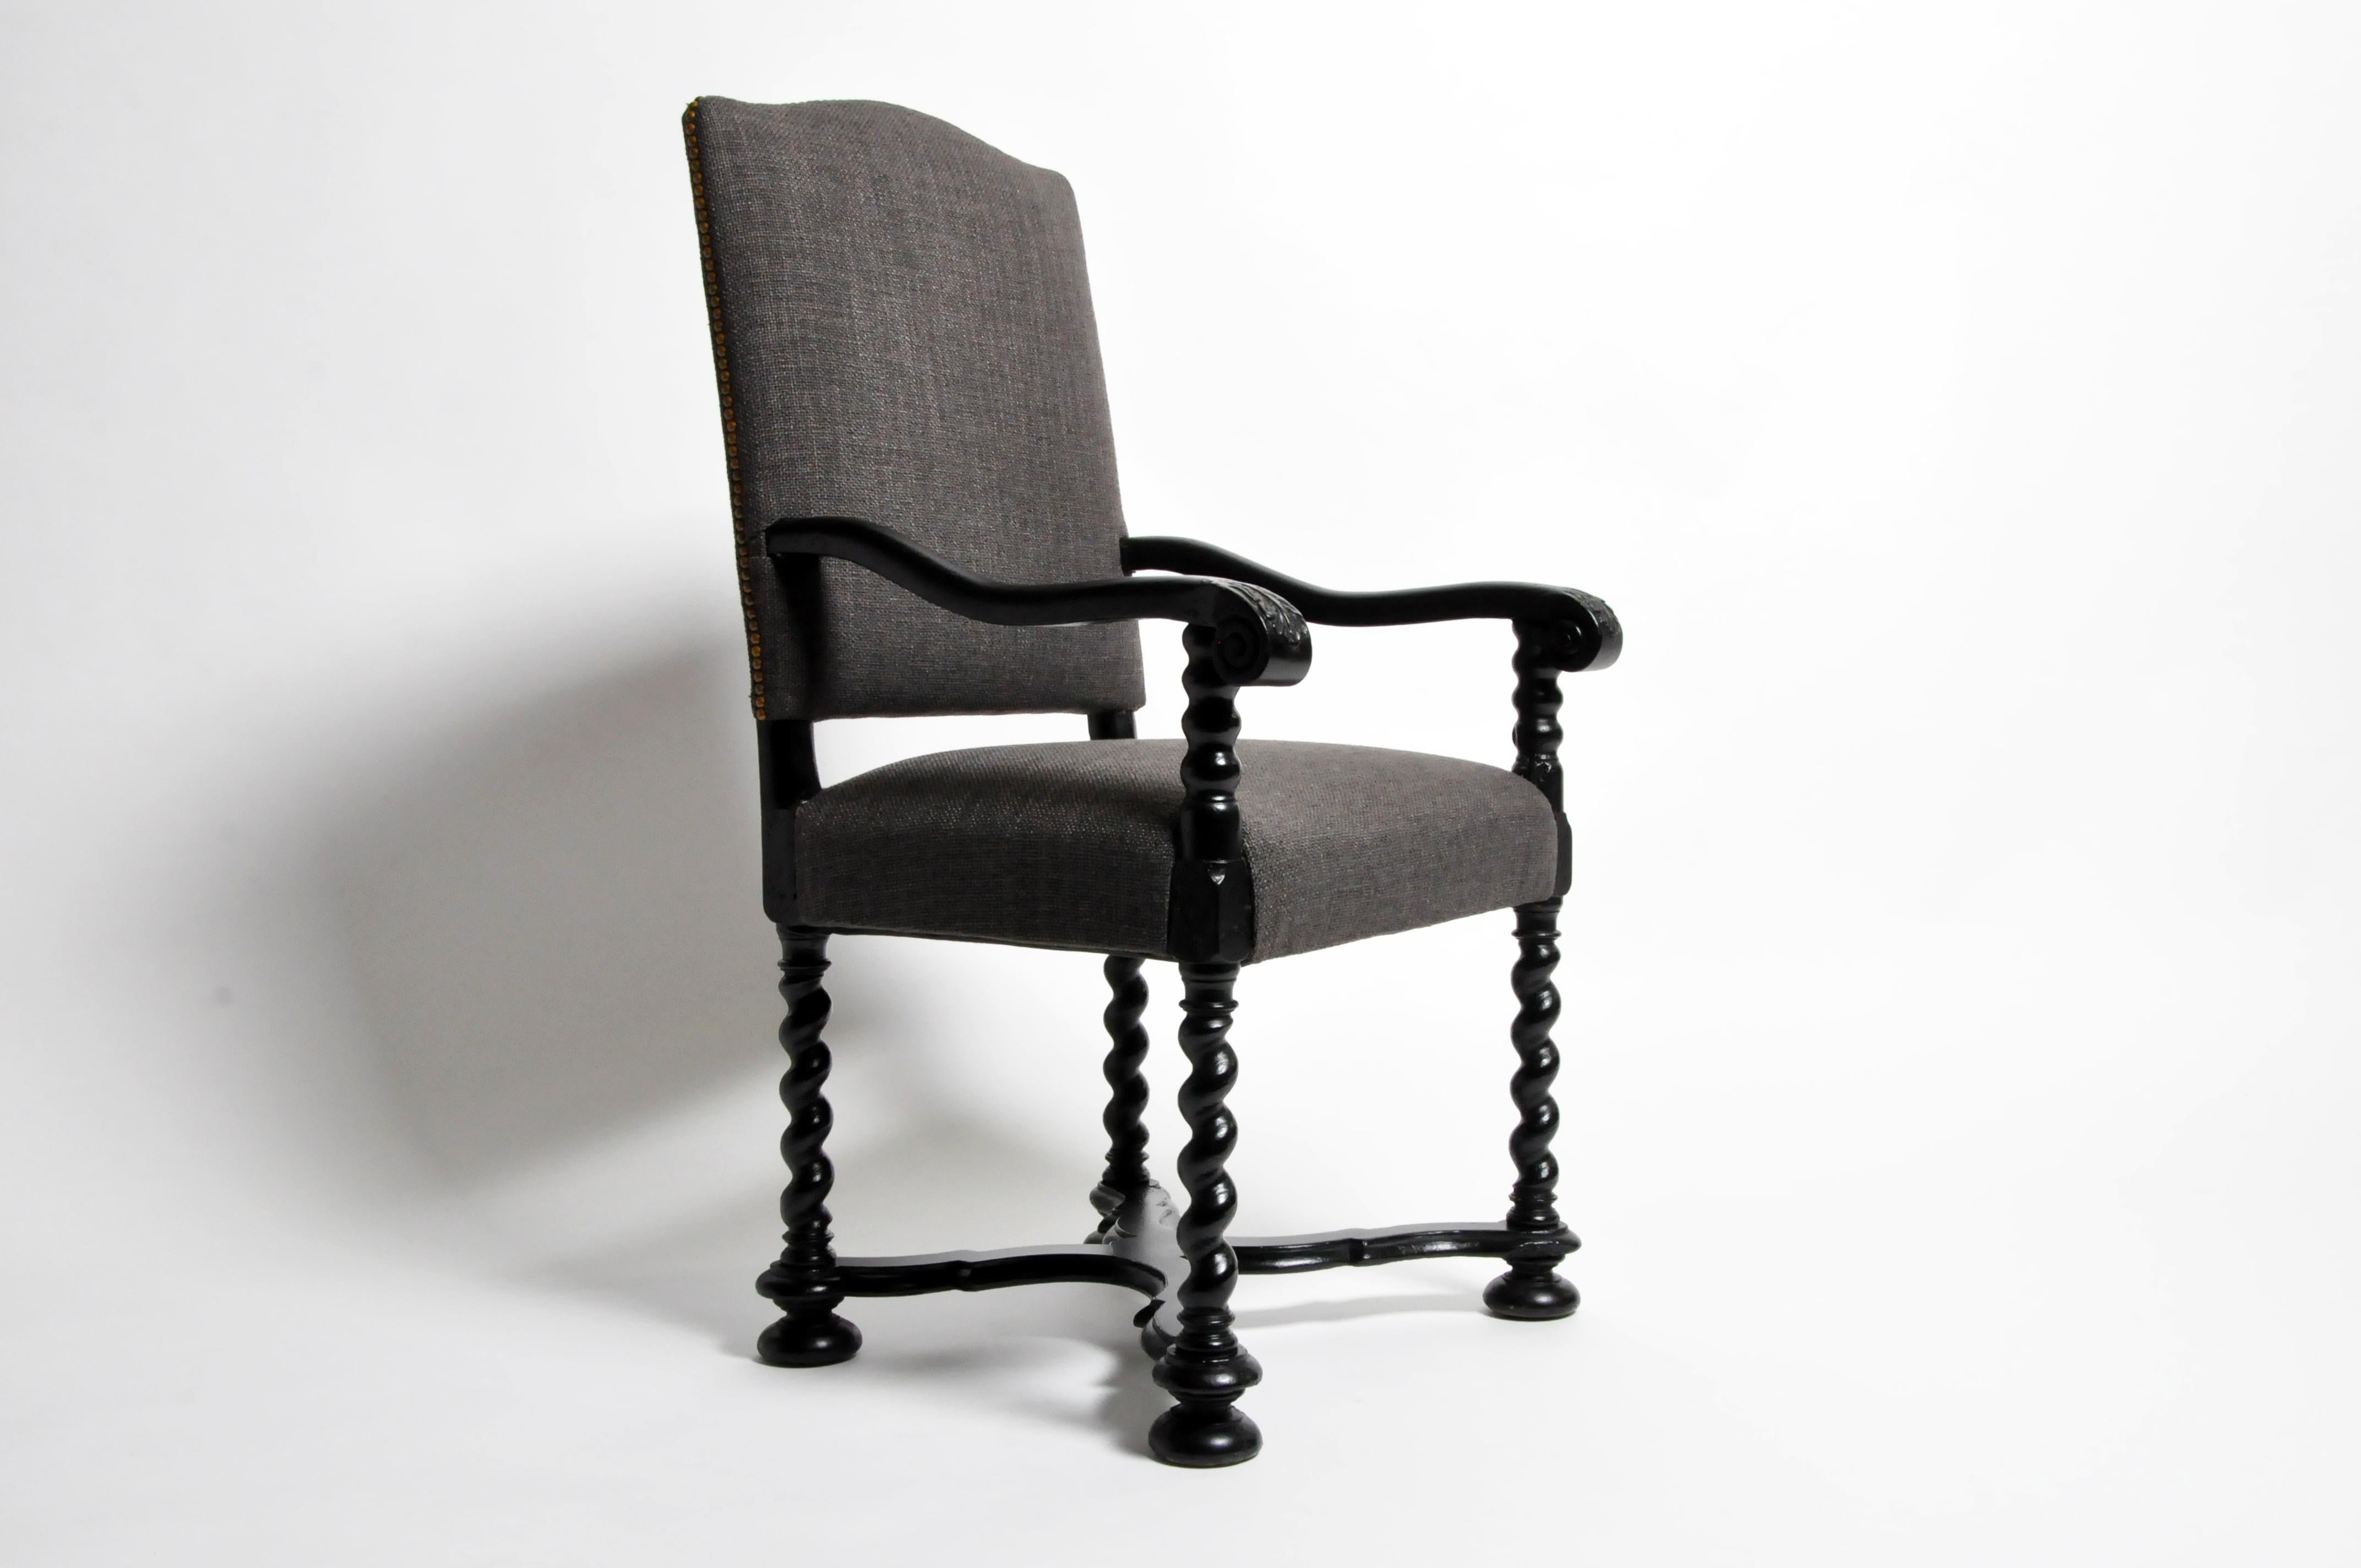 This carved armchair has an arched and padded back upholstered in burlap-like fabric with nailhead decoration. The exposed Walnut frame features scrolled arms on turned supports that continue down into barley twist legs raised on ball, joined by an